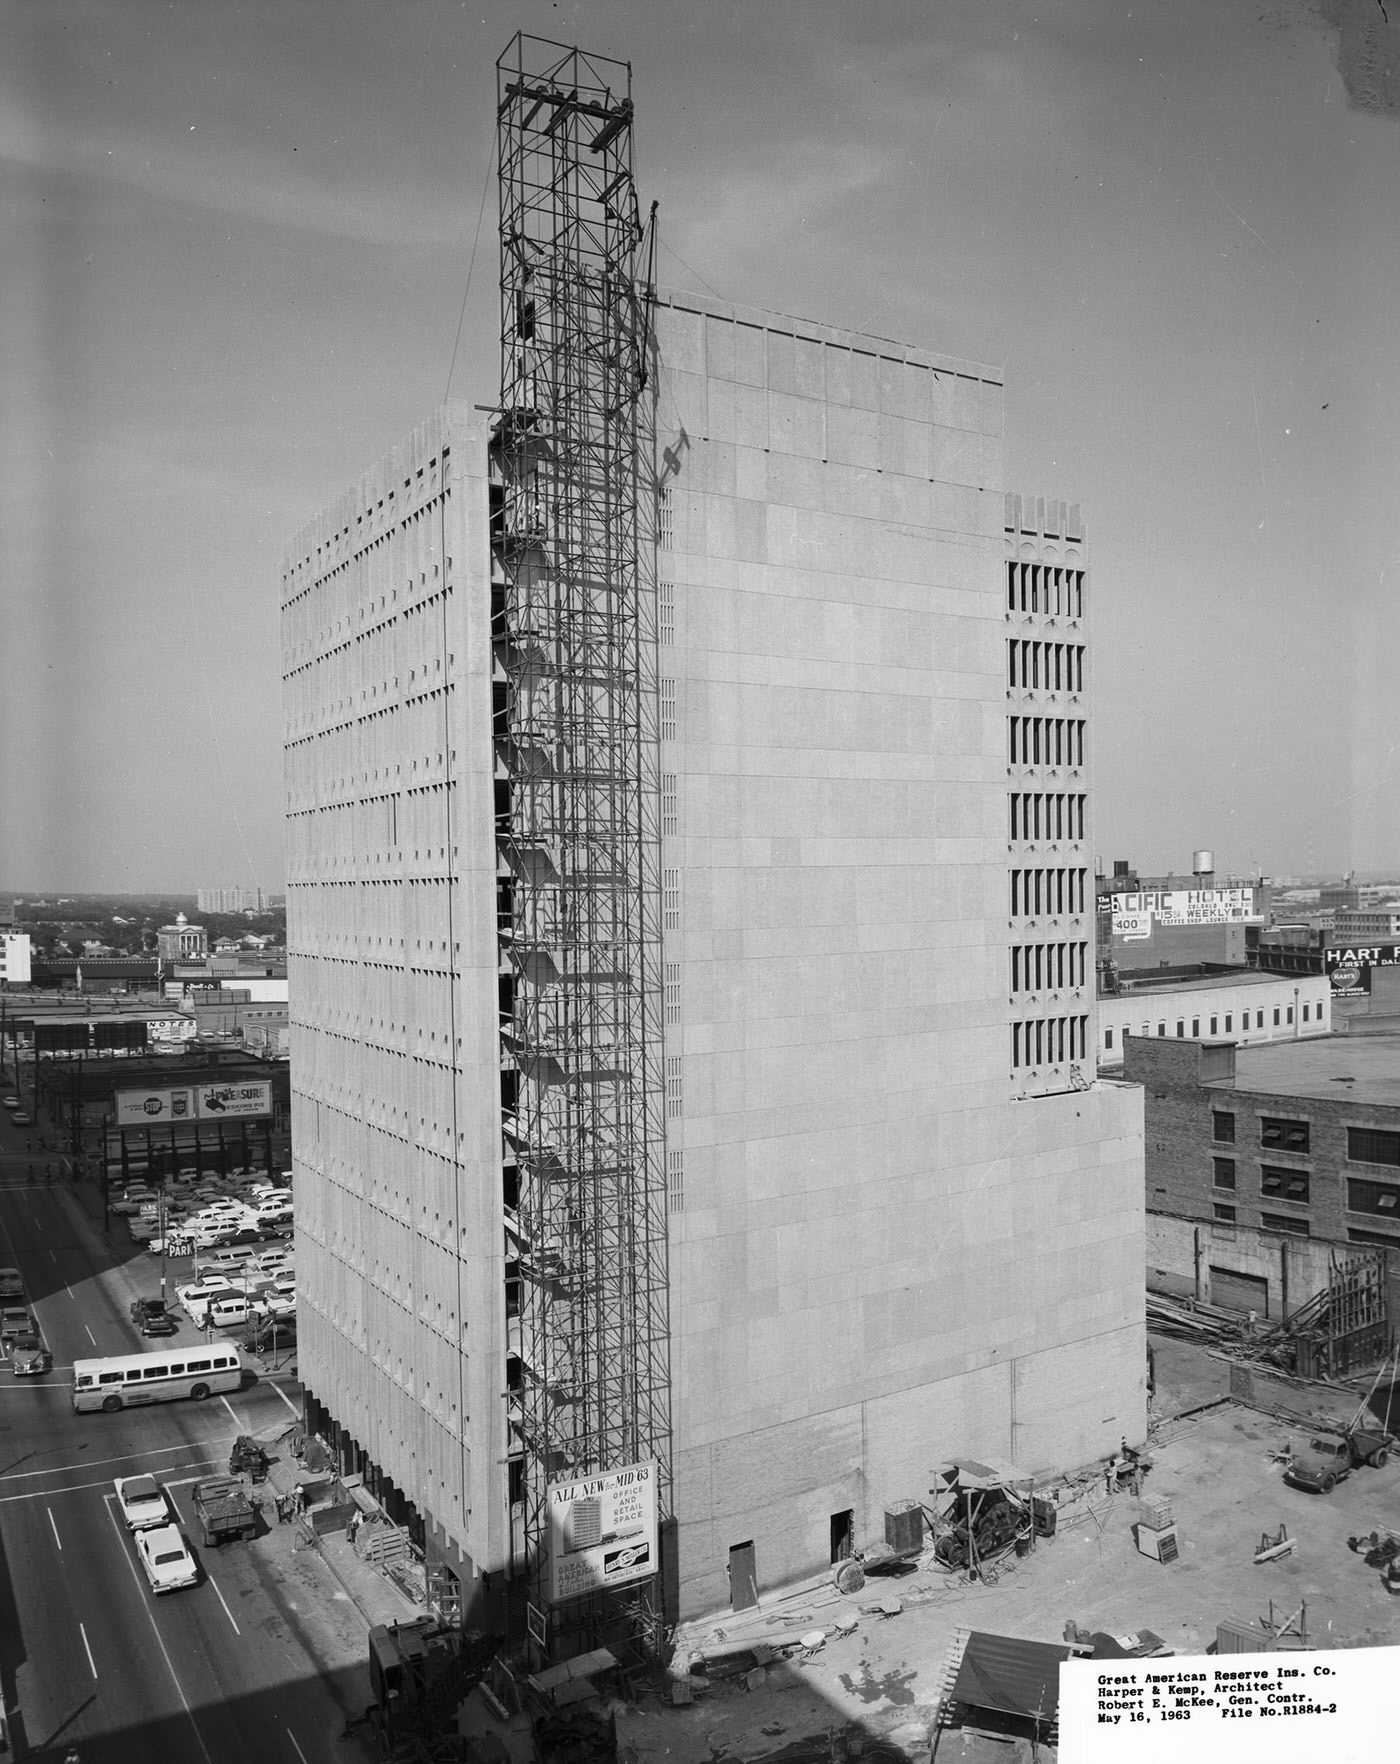 Great American Reserve Insurance Company building under construction in downtown Dallas, Texas, 1963